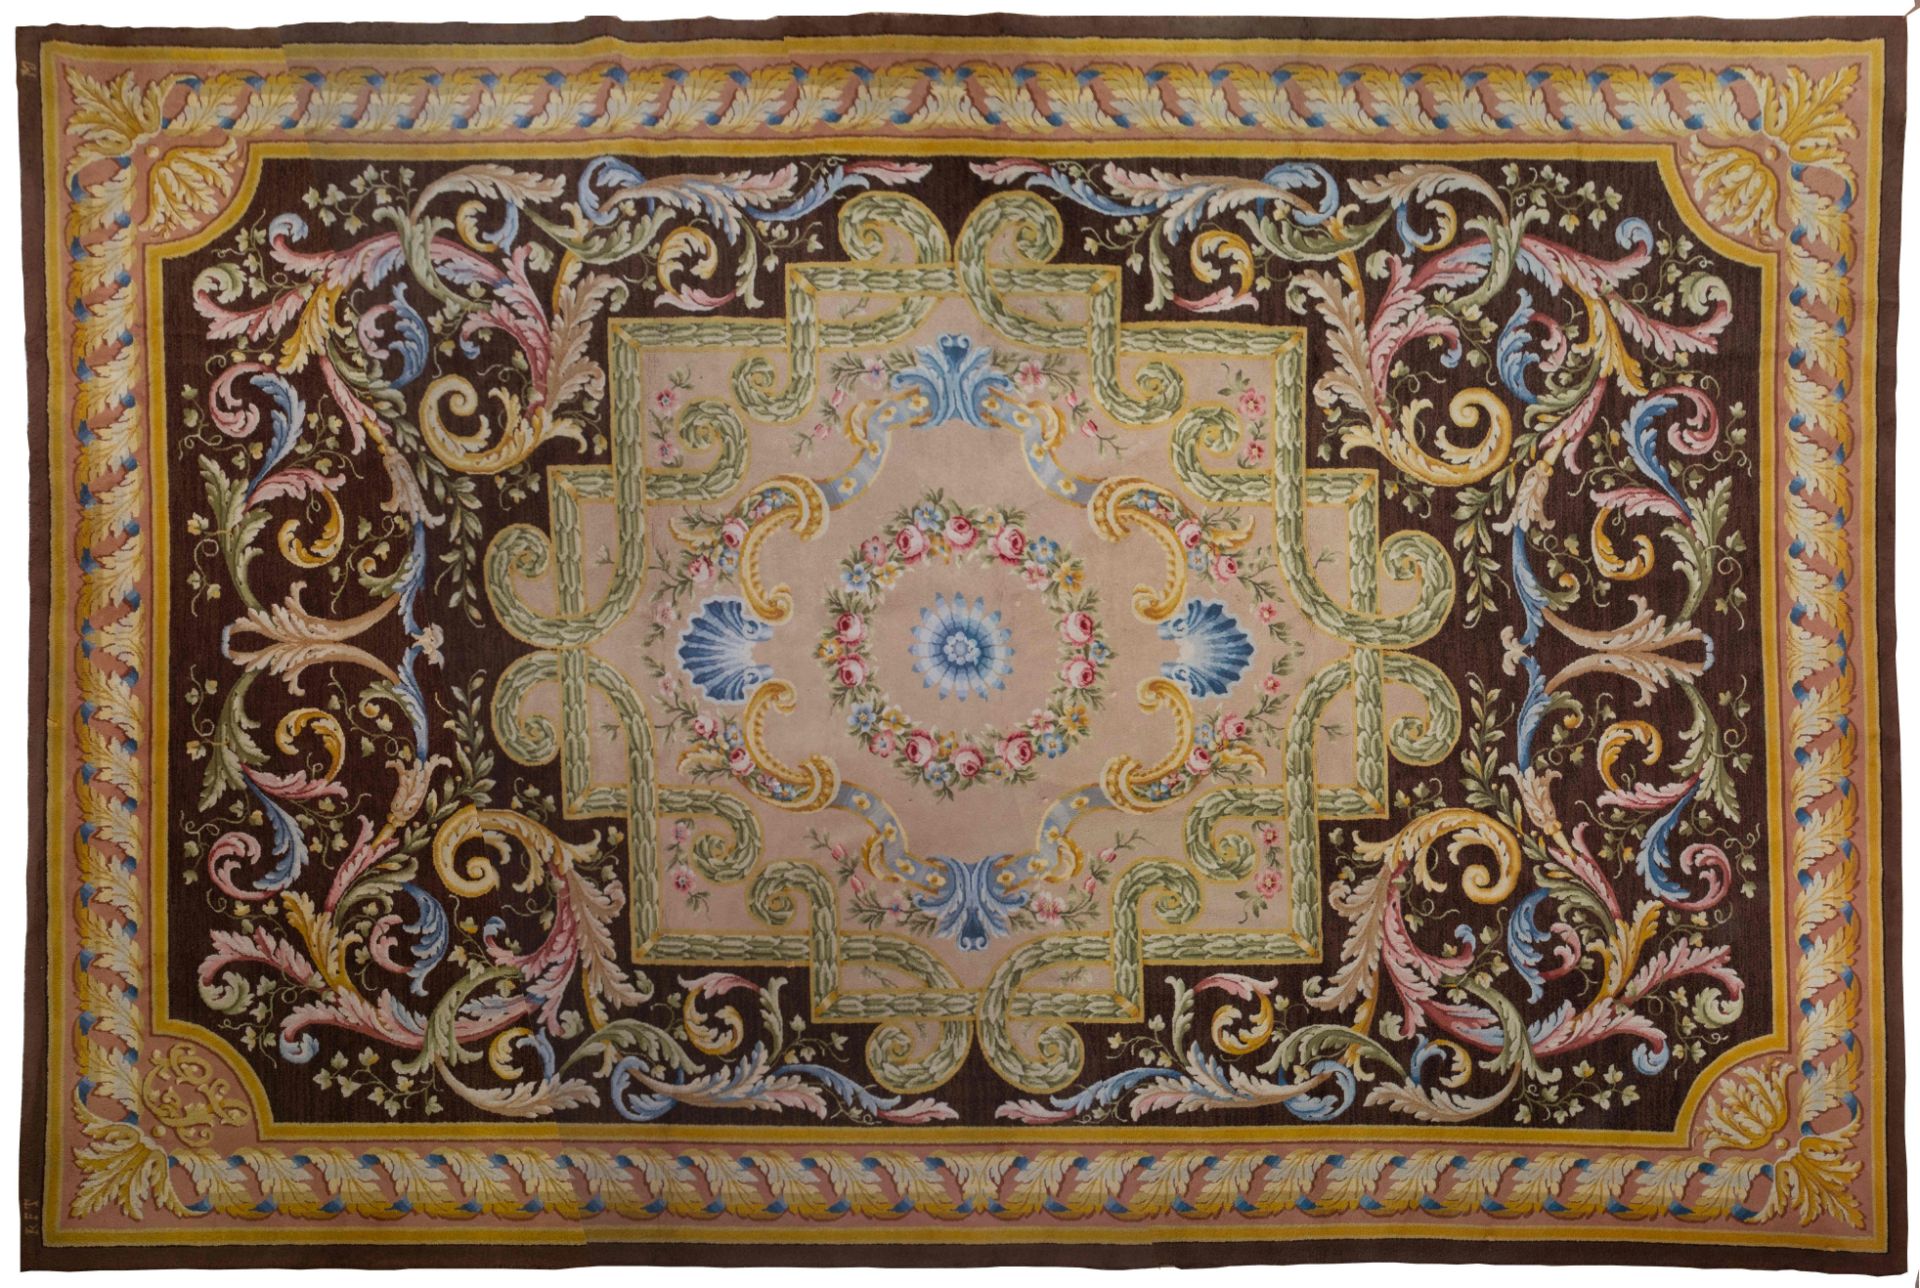 A large Spanish wool rug, from the Royal Tapestry Factory (Real Fábrica de Tapices)